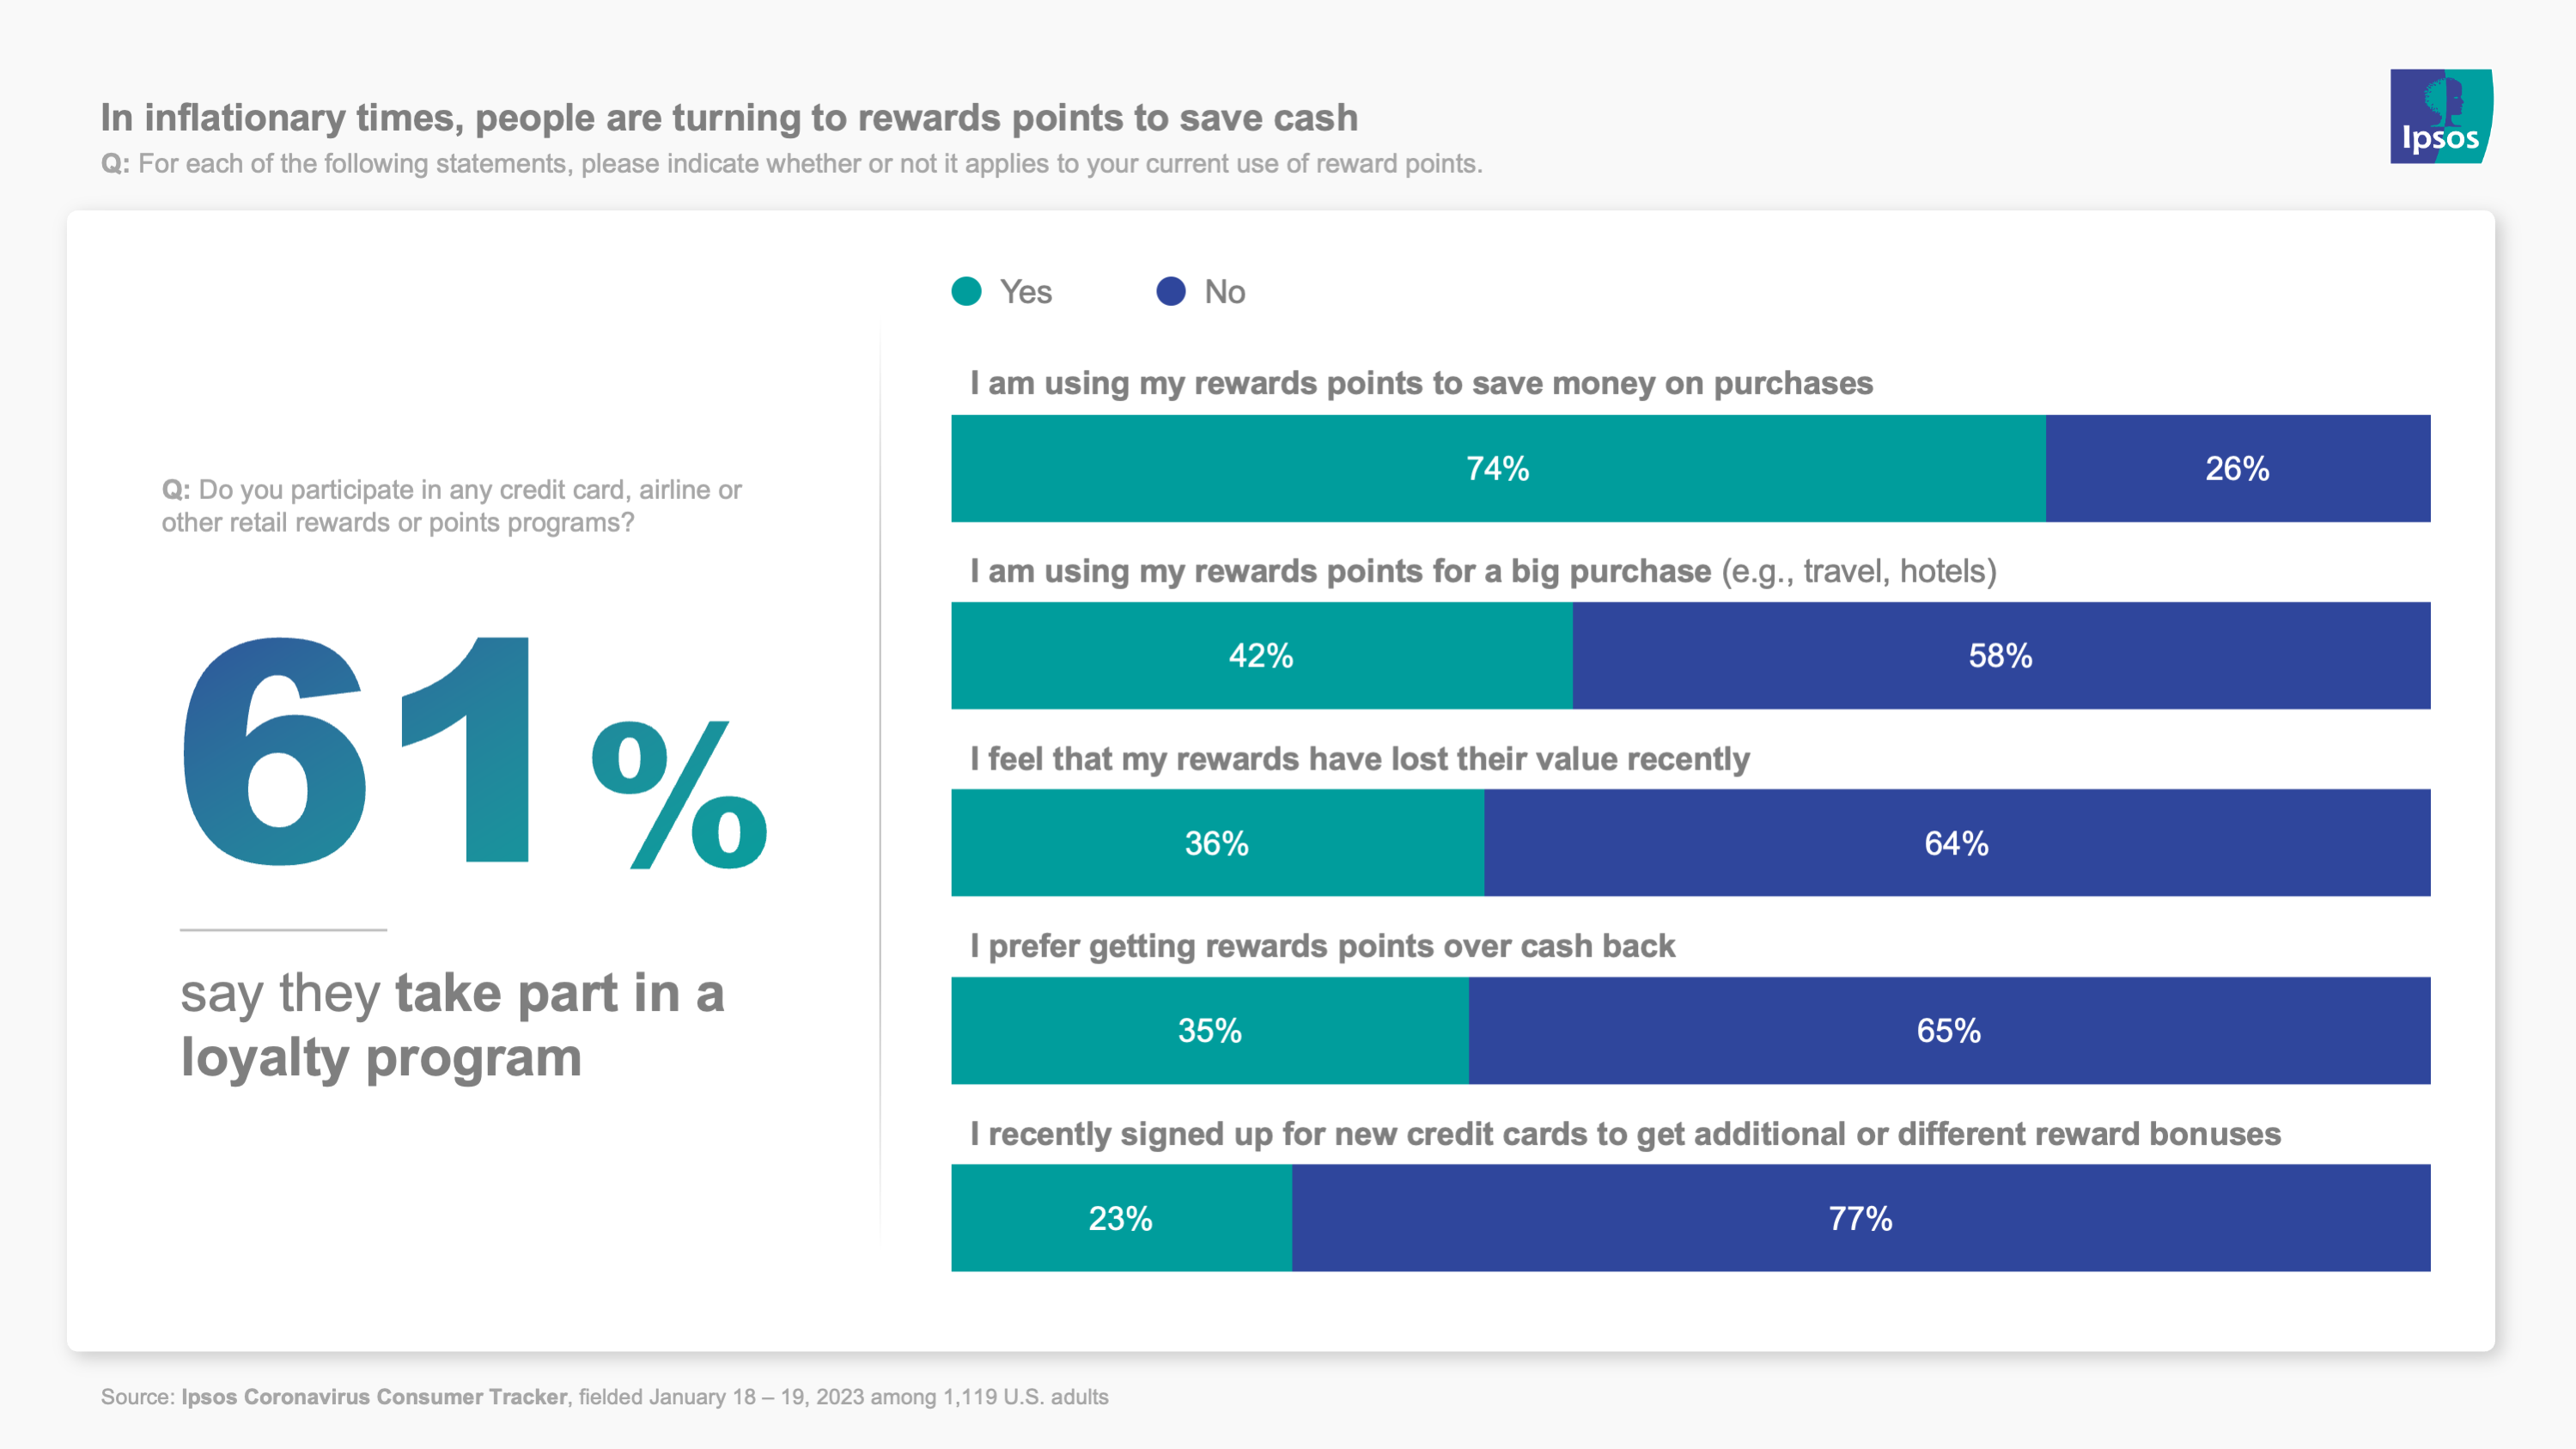 Chart showing that people are using credit card and loyalty points to save money